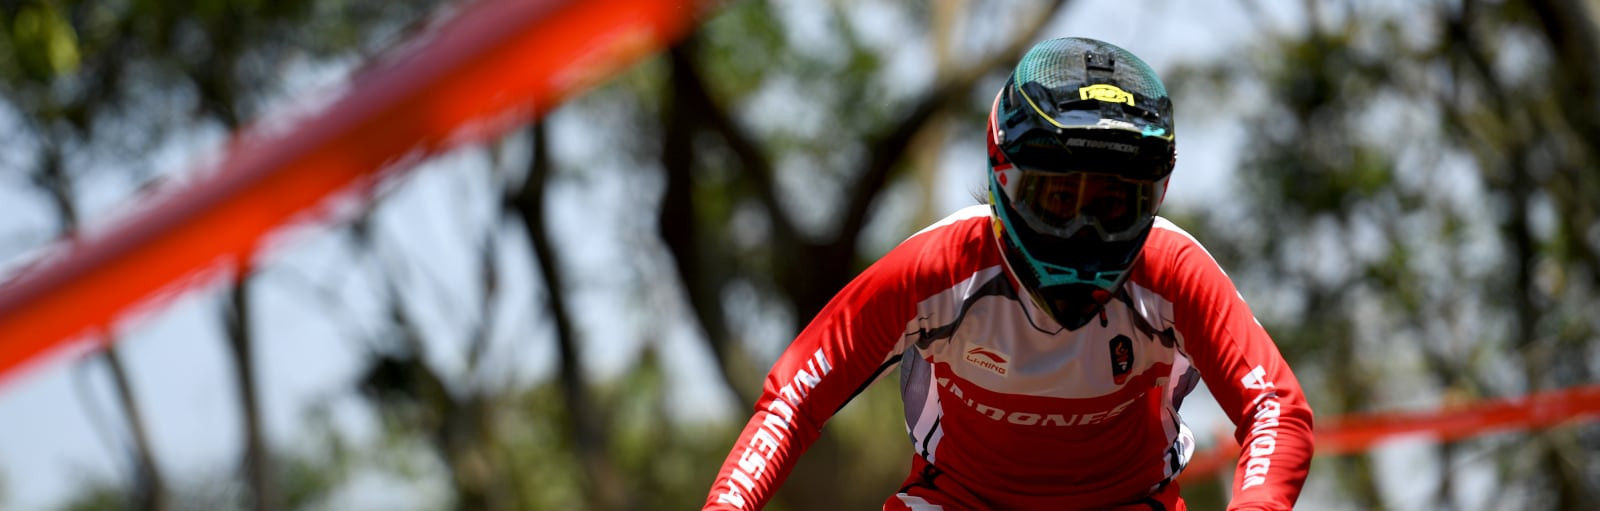 Hosts Indonesia won two cycling mountain bike gold medals as the men's and women's downhill events took centre stage ©Asian Games 2018